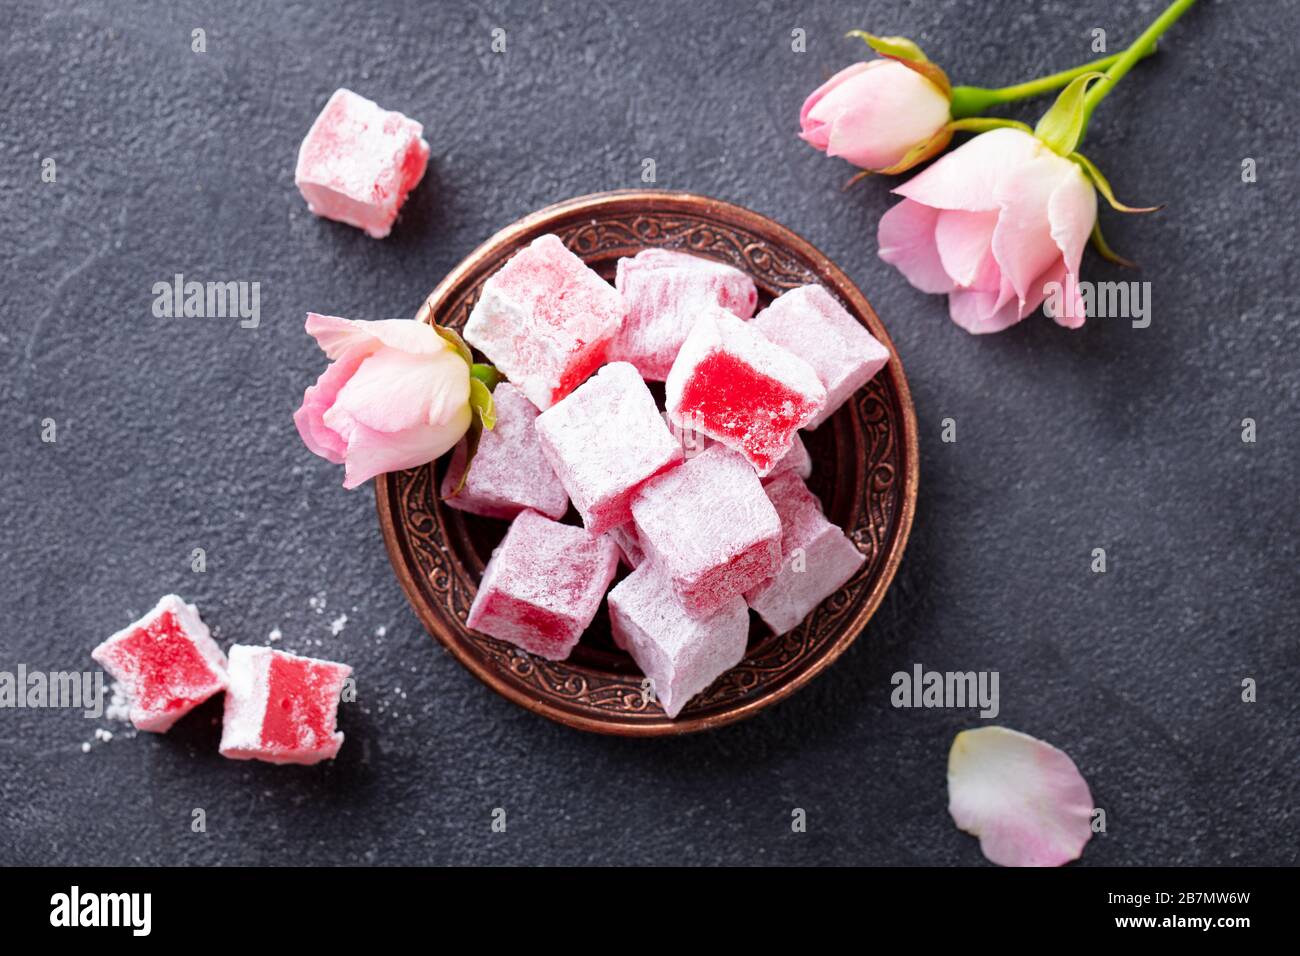 Turkish delights lokum, rose flavour in a copper plate. Dark background. Top view. Stock Photo